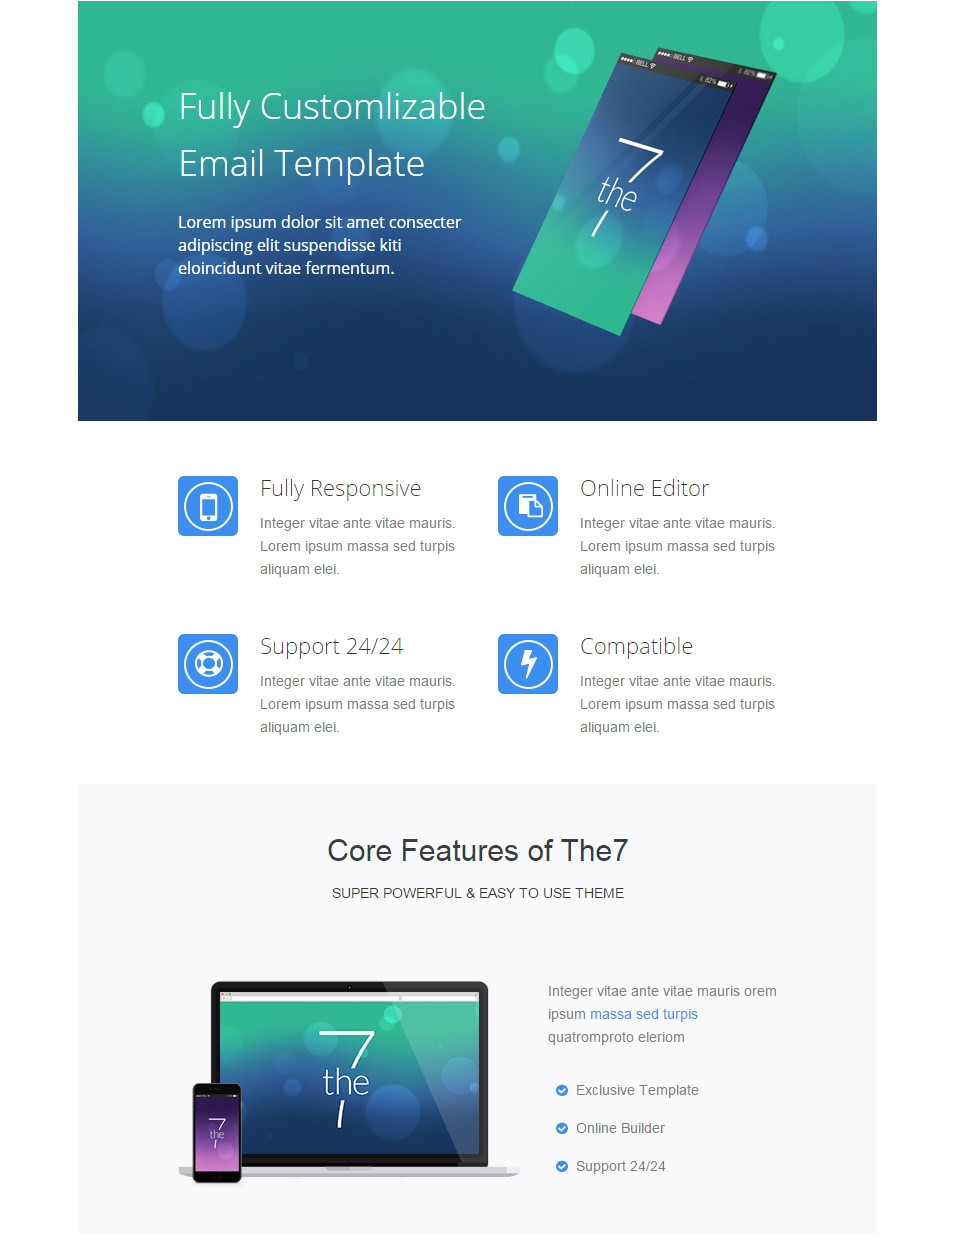 email templates for ads sales